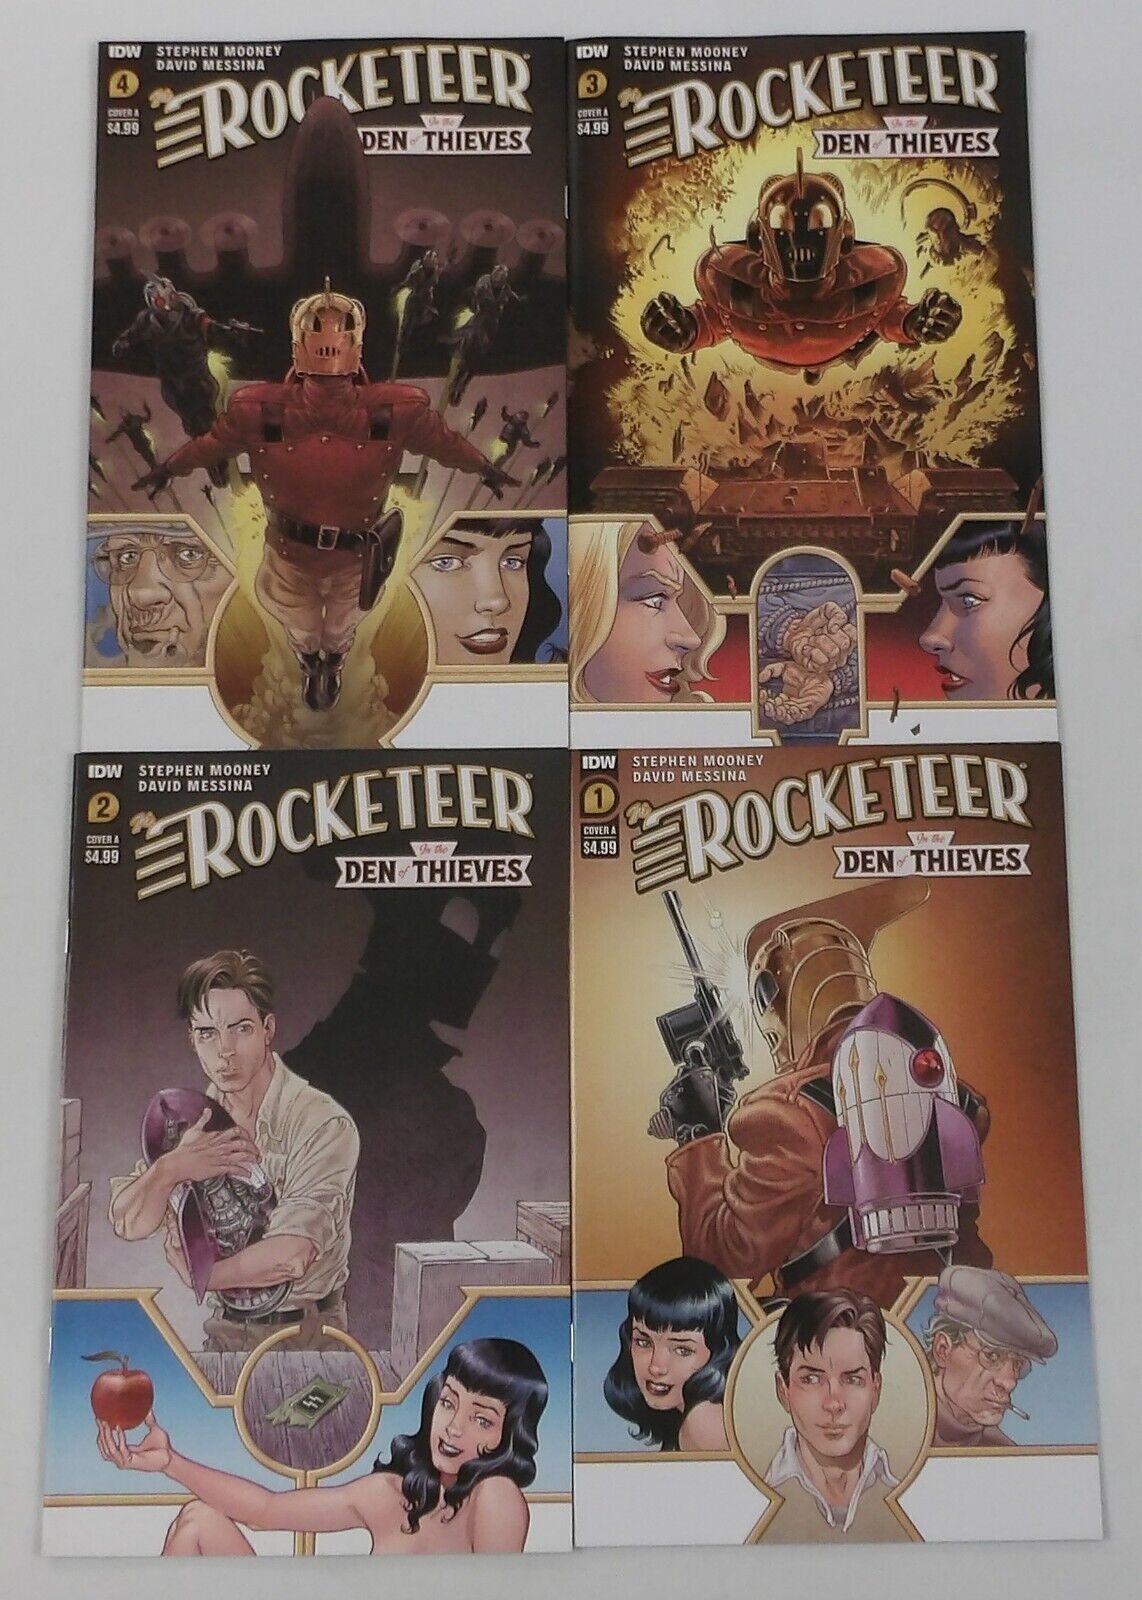 Rocketeer in the Den of Thieves #1-4 VF/NM complete series - Mooney all A set